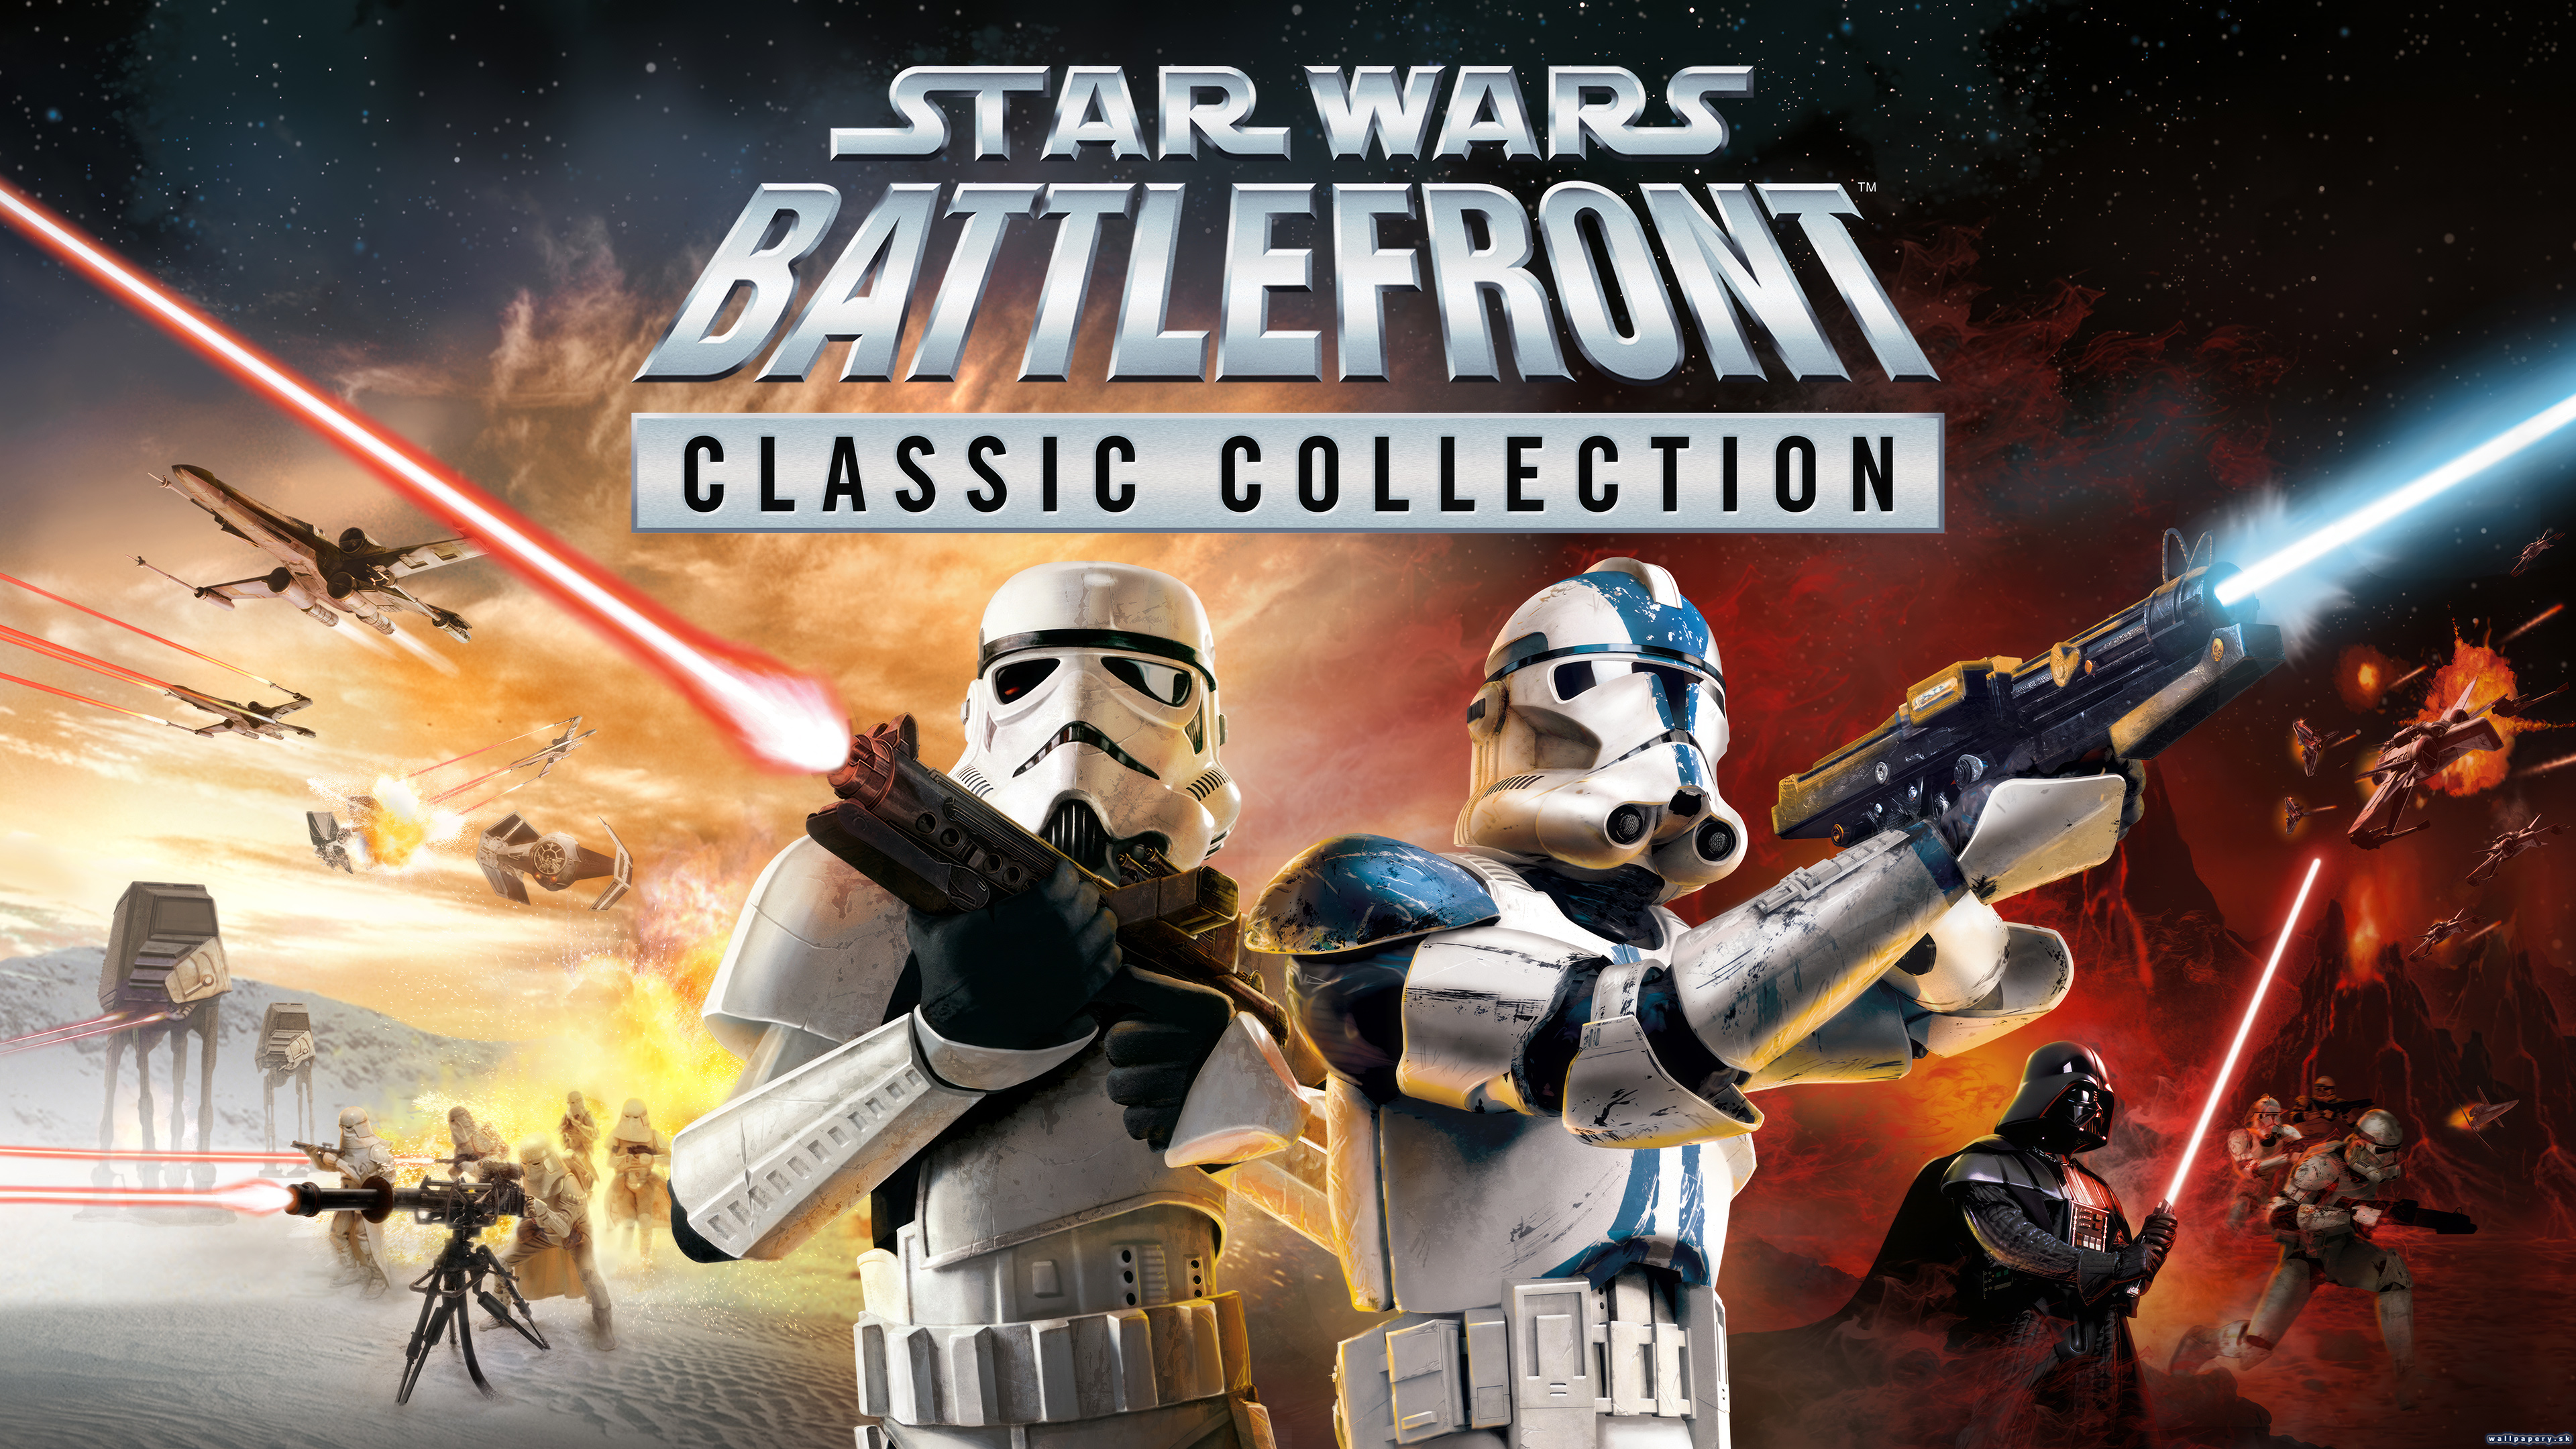 Star Wars: Battlefront Classic Collection - wallpaper 1